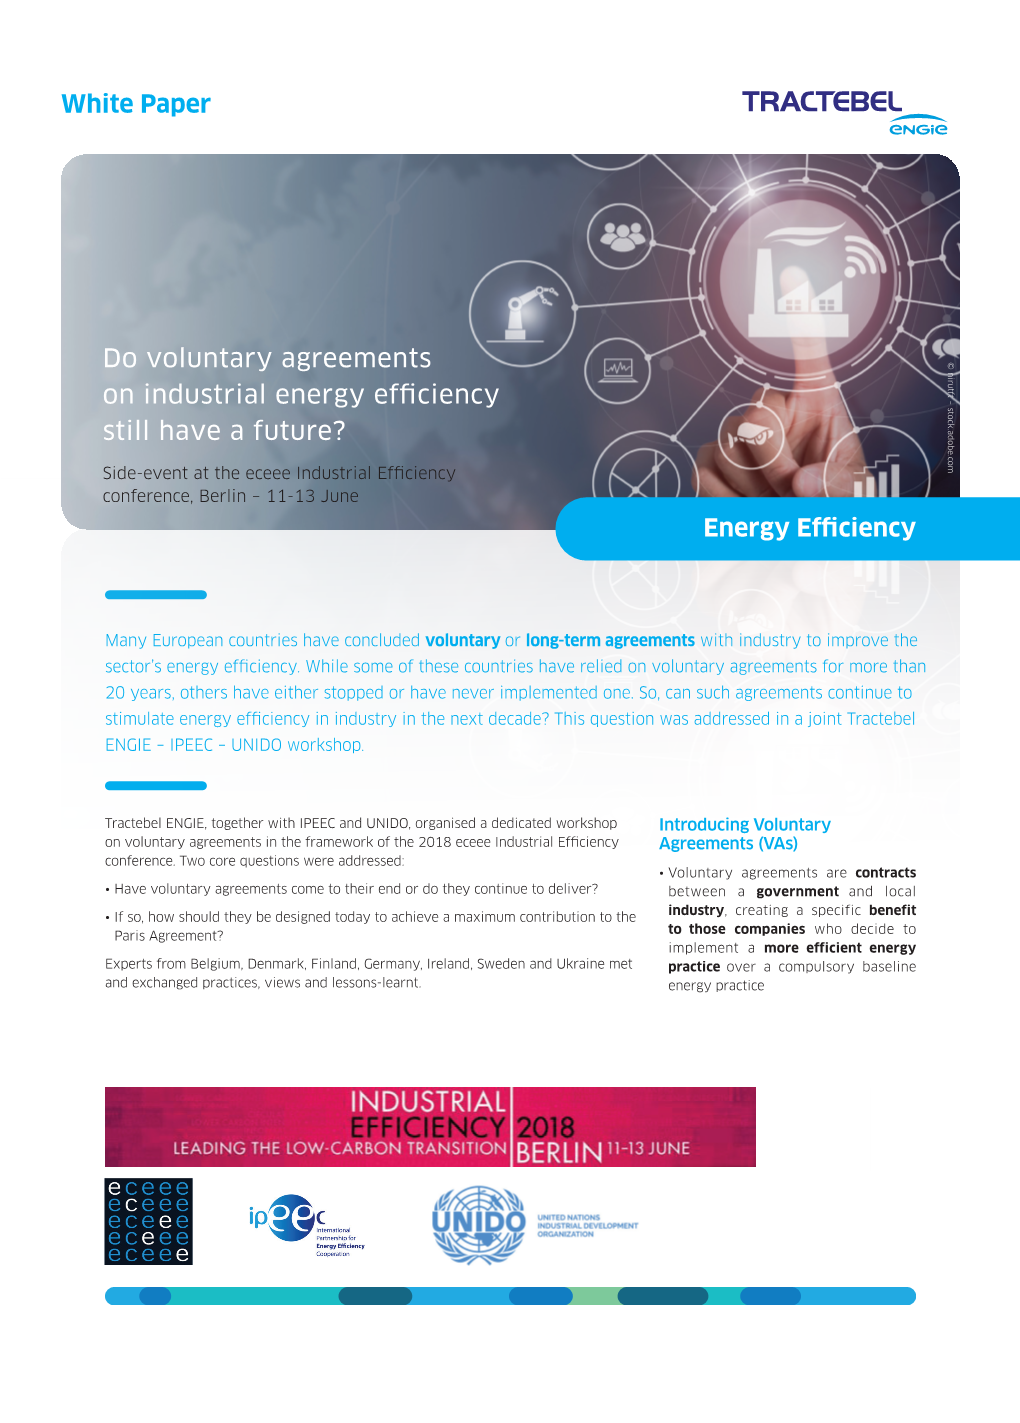 Do Voluntary Agreements on Industrial Energy Efficiency Still Have a Future?